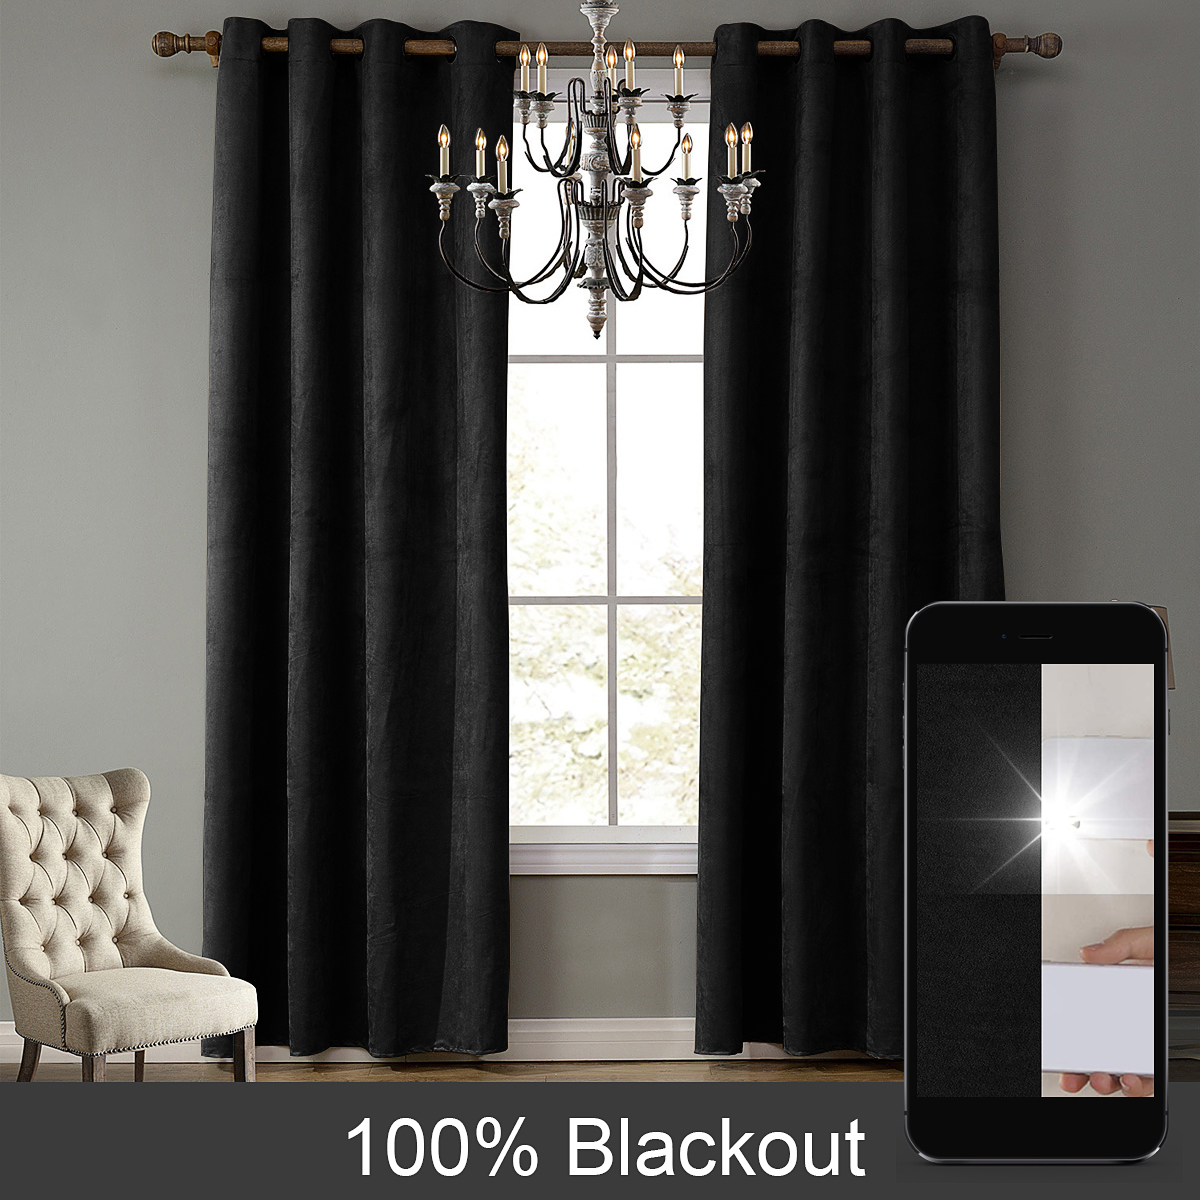 Dwcn Light Grey Blackout Curtains Room Darkening Thermal Insulated Grommet Light